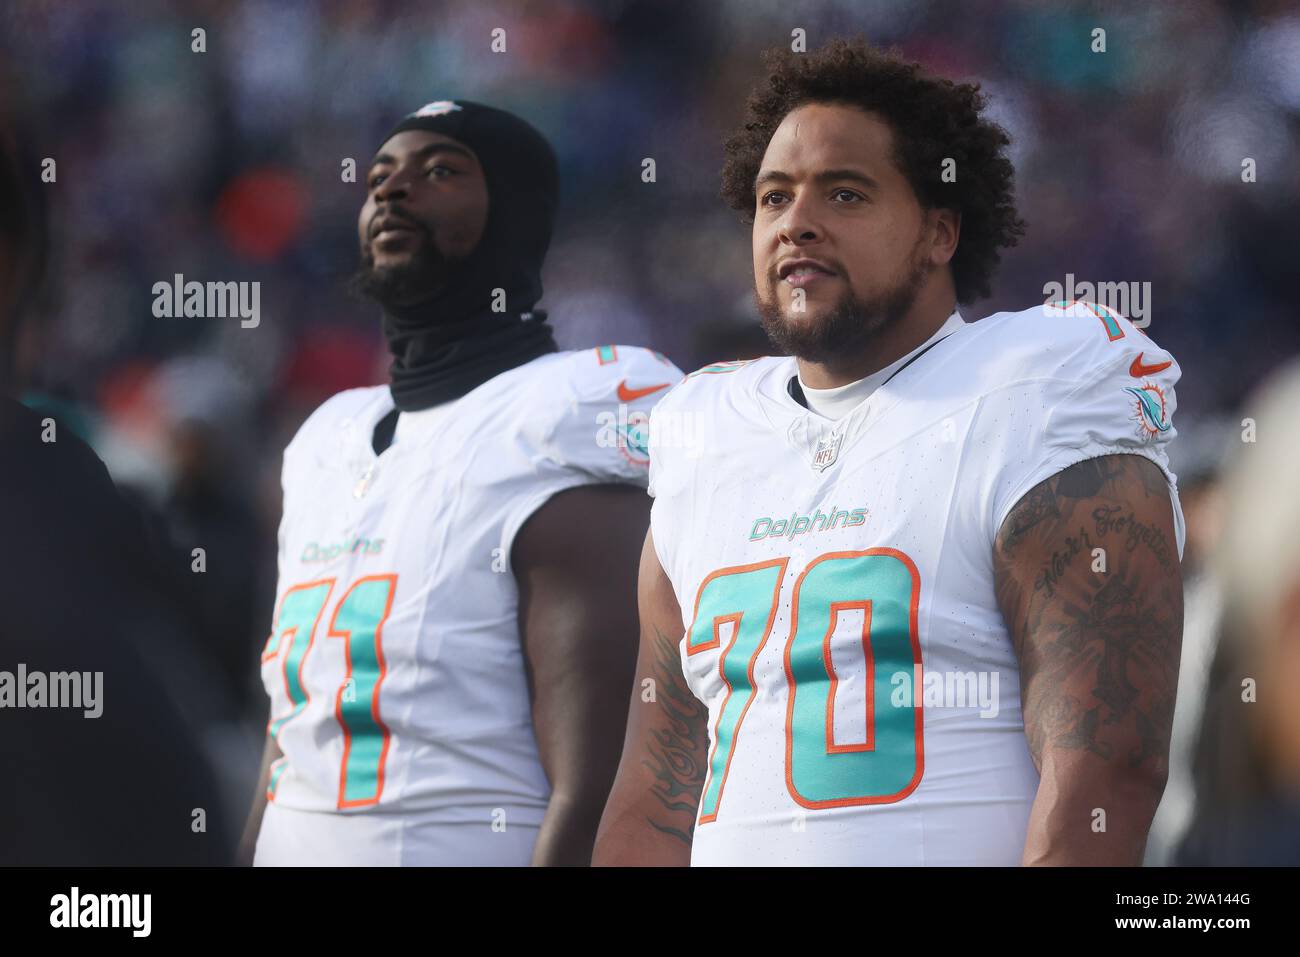 Baltimore, MD, USA. 31st Dec, 2023. Miami Dolphins T Kendall Lamm (70) and Miami Dolphins T Kion Smith (71) pictured on the sidelines during a game against the Baltimore Ravens at M&T Bank Stadium in Baltimore, MD. Photo/ Mike Buscher/Cal Sport Media/Alamy Live News Stock Photo